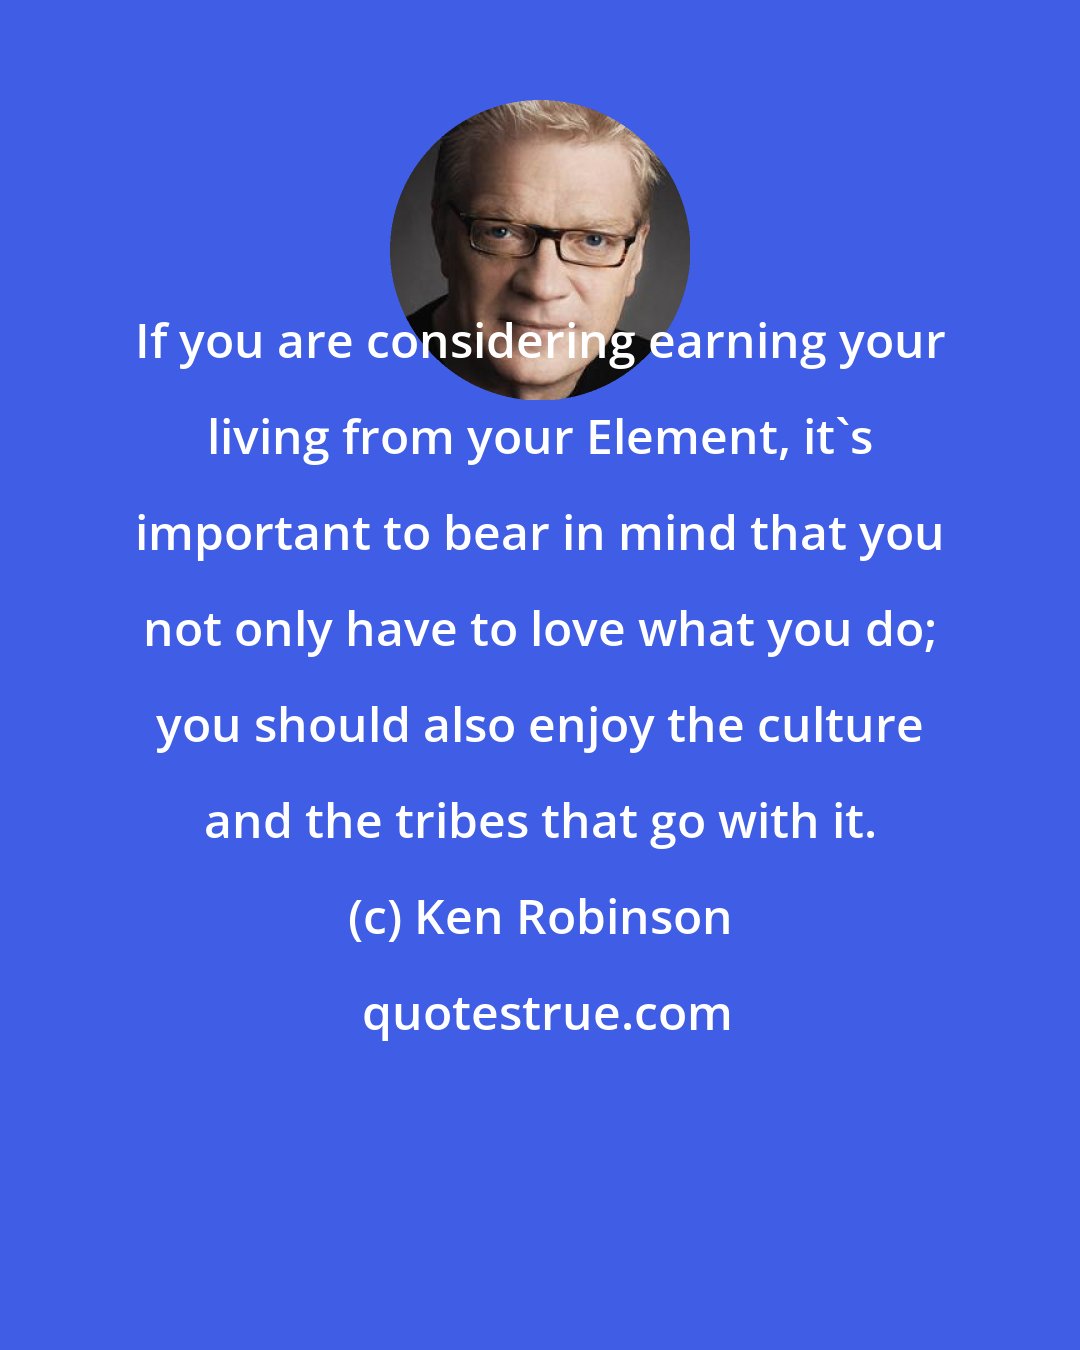 Ken Robinson: If you are considering earning your living from your Element, it's important to bear in mind that you not only have to love what you do; you should also enjoy the culture and the tribes that go with it.